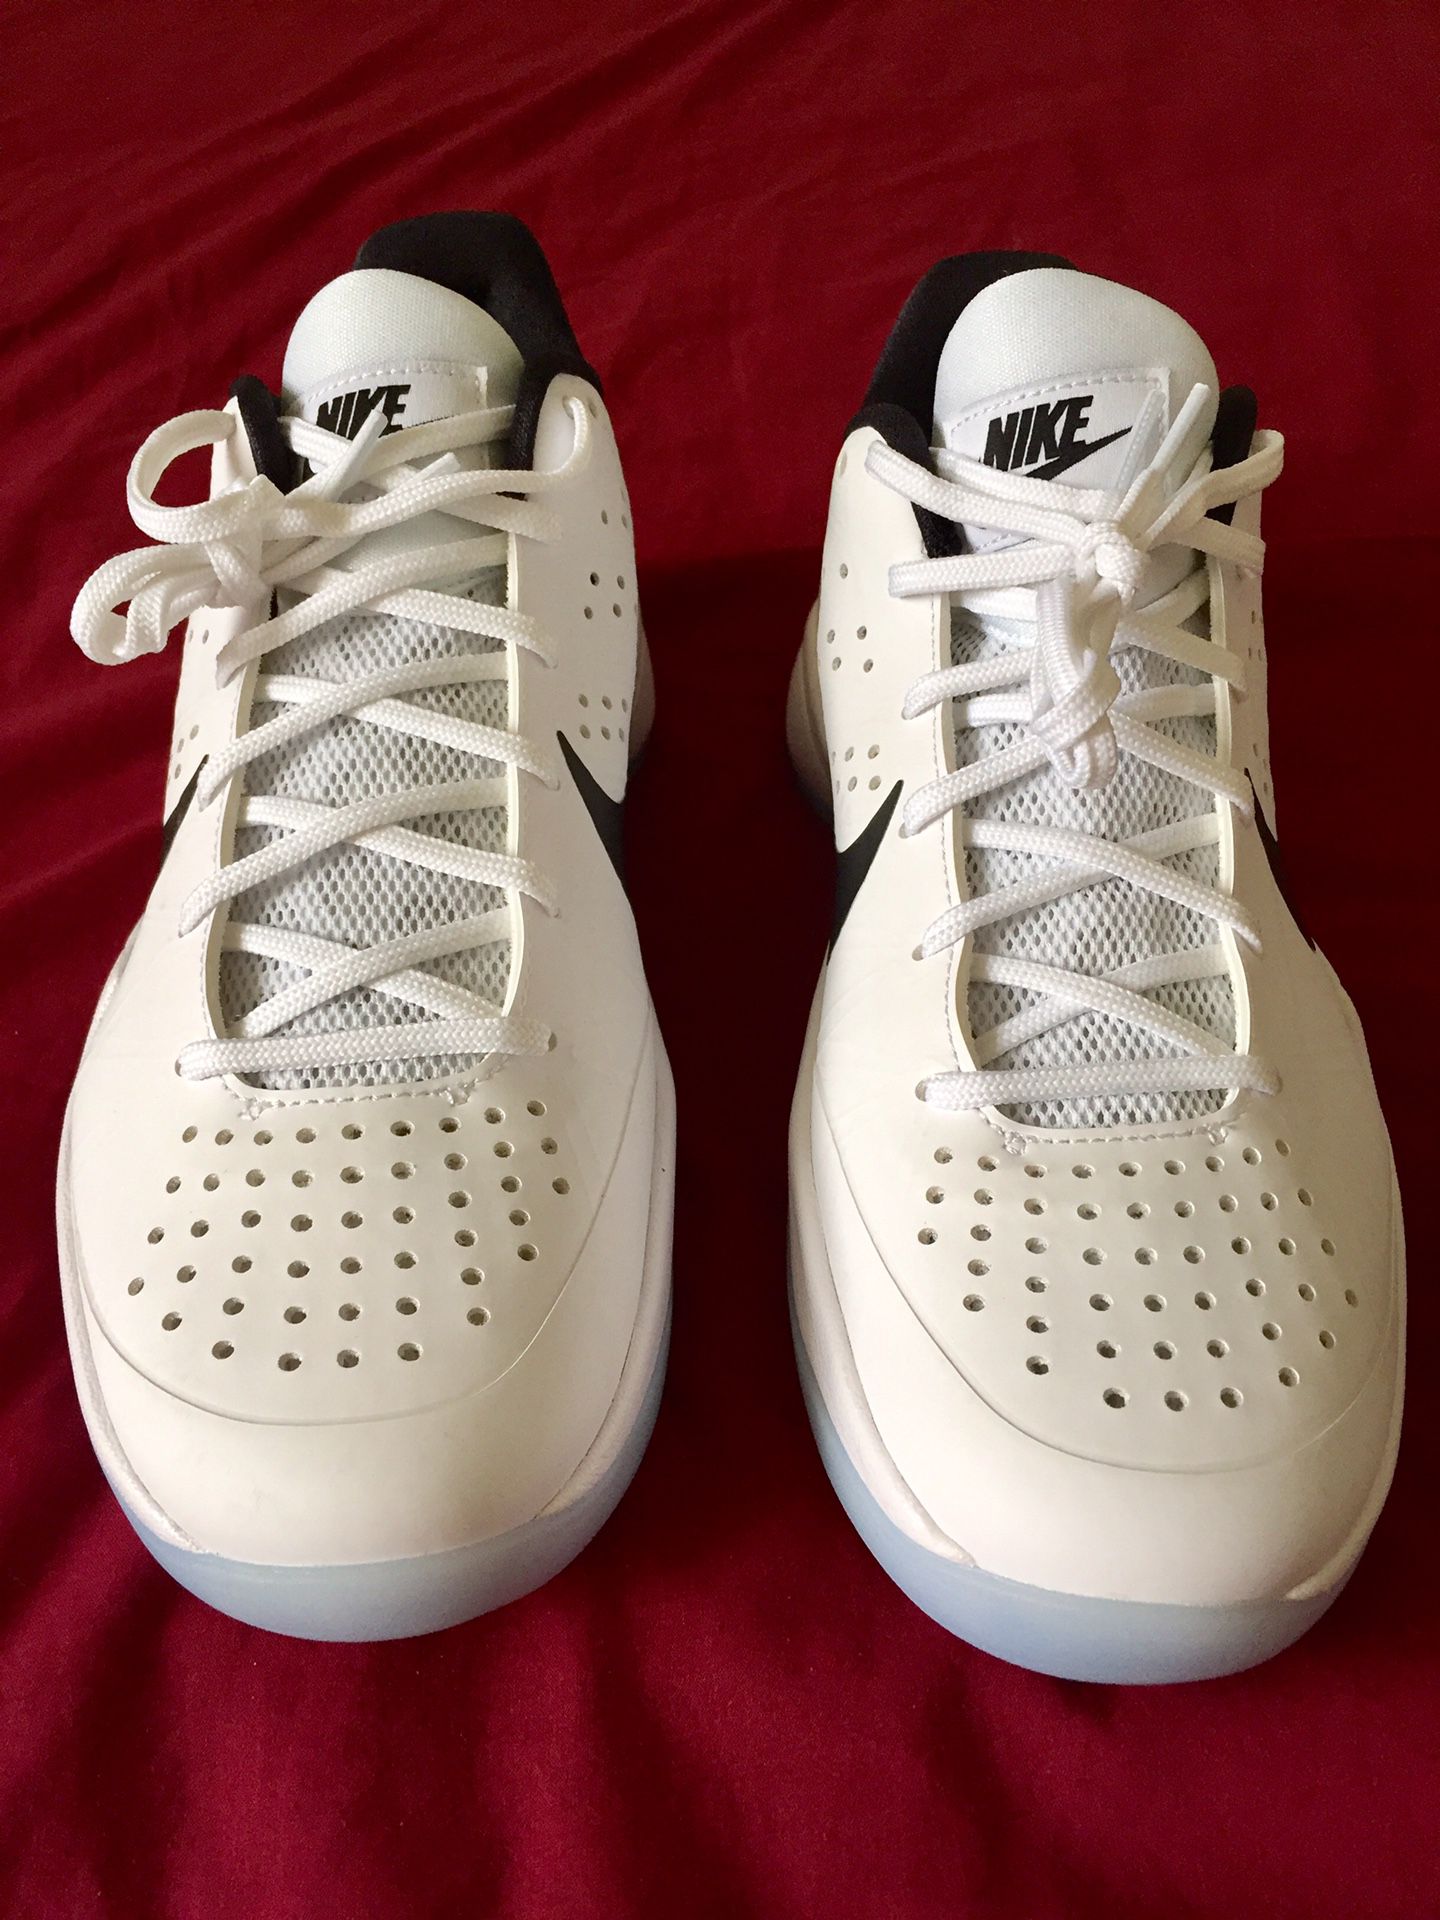 Ru forene Fjerde Nike Air Zoom Hyperattack Volleyball Shoes White Black Ice Men's Sz 8.5 NEW  for Sale in Tempe, AZ - OfferUp